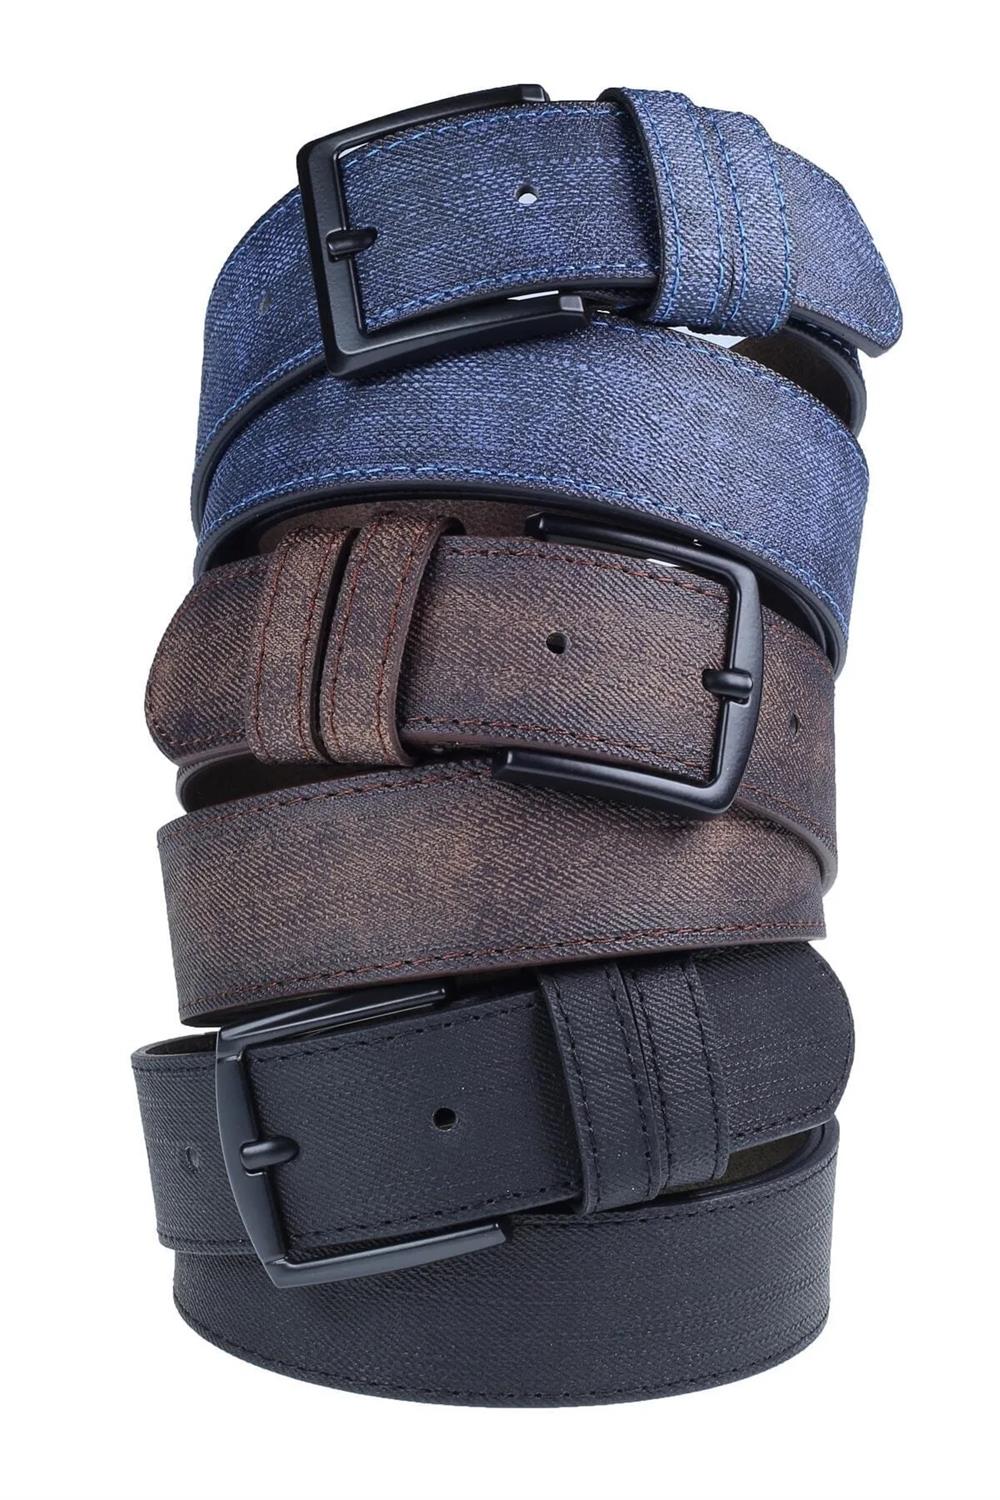 R0928 Dewberry Set Of 3 Mens Belt For Jeans And Canvas-BLACK-BROWN-NAVY